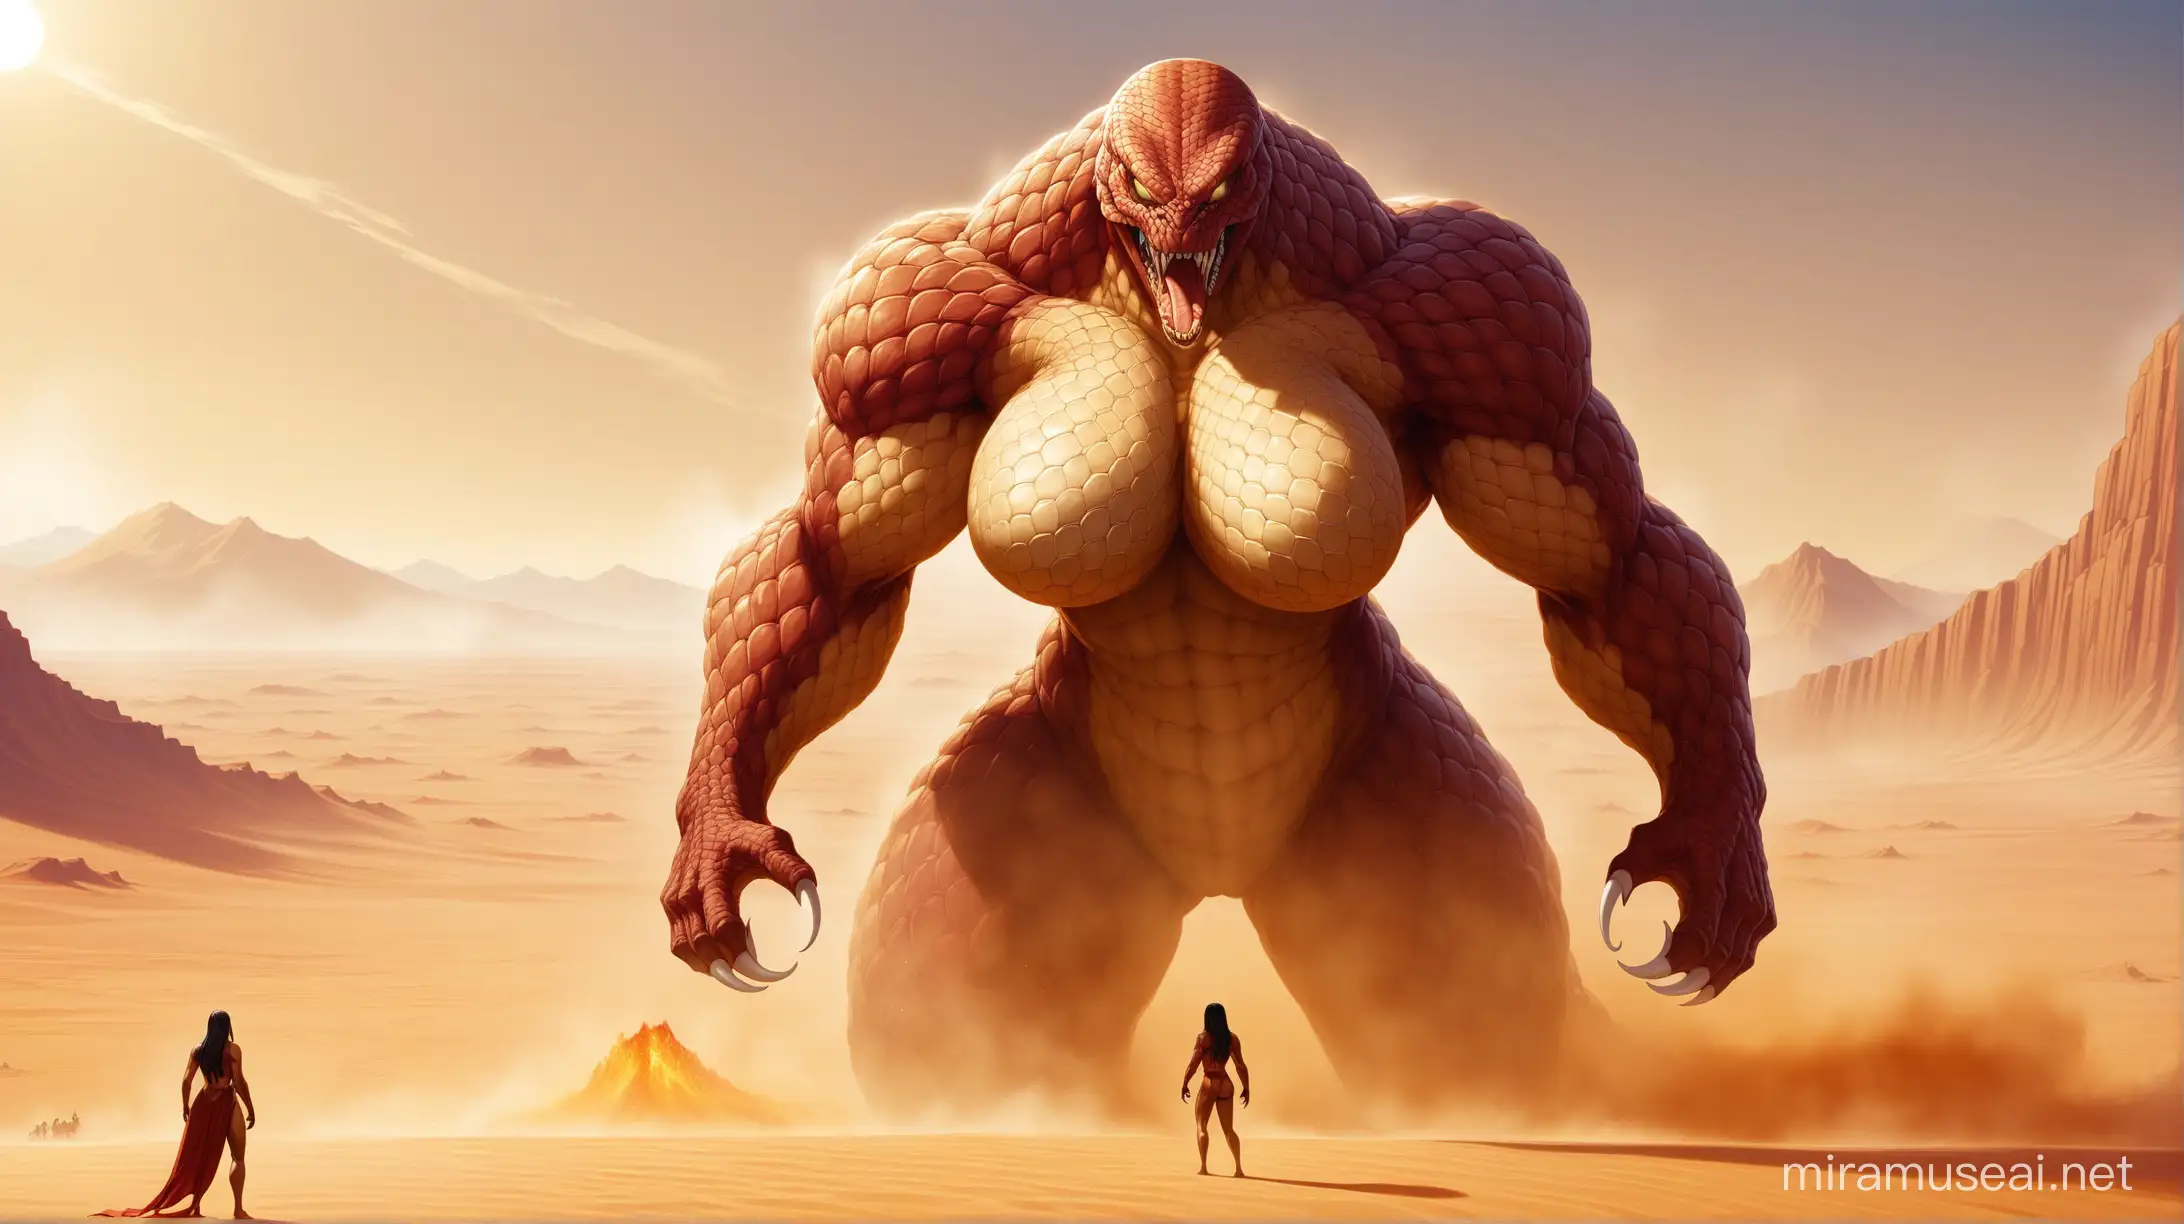 a half-snake woman, angry, heat, hot, big breasts, mutant, monster, sand, desert background, giant, titan, colossal.
